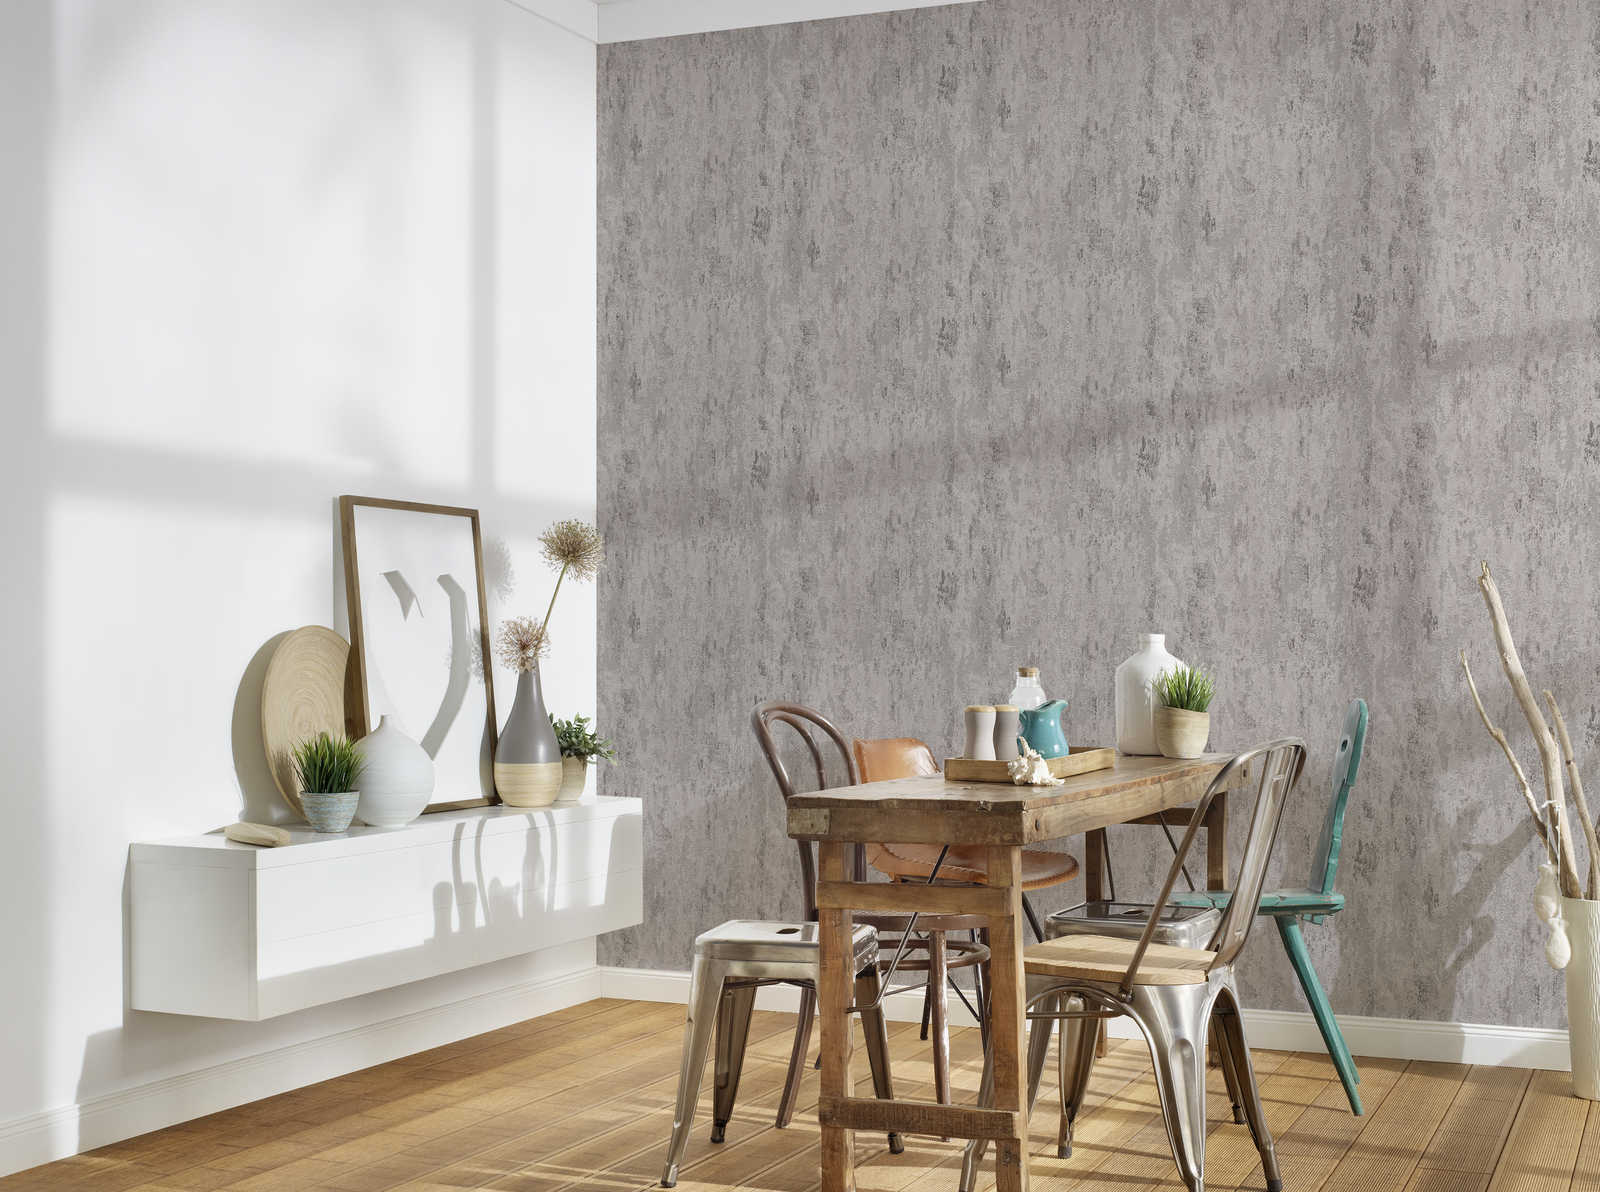             Rust non-woven wallpaper with textured pattern - grey, silver
        